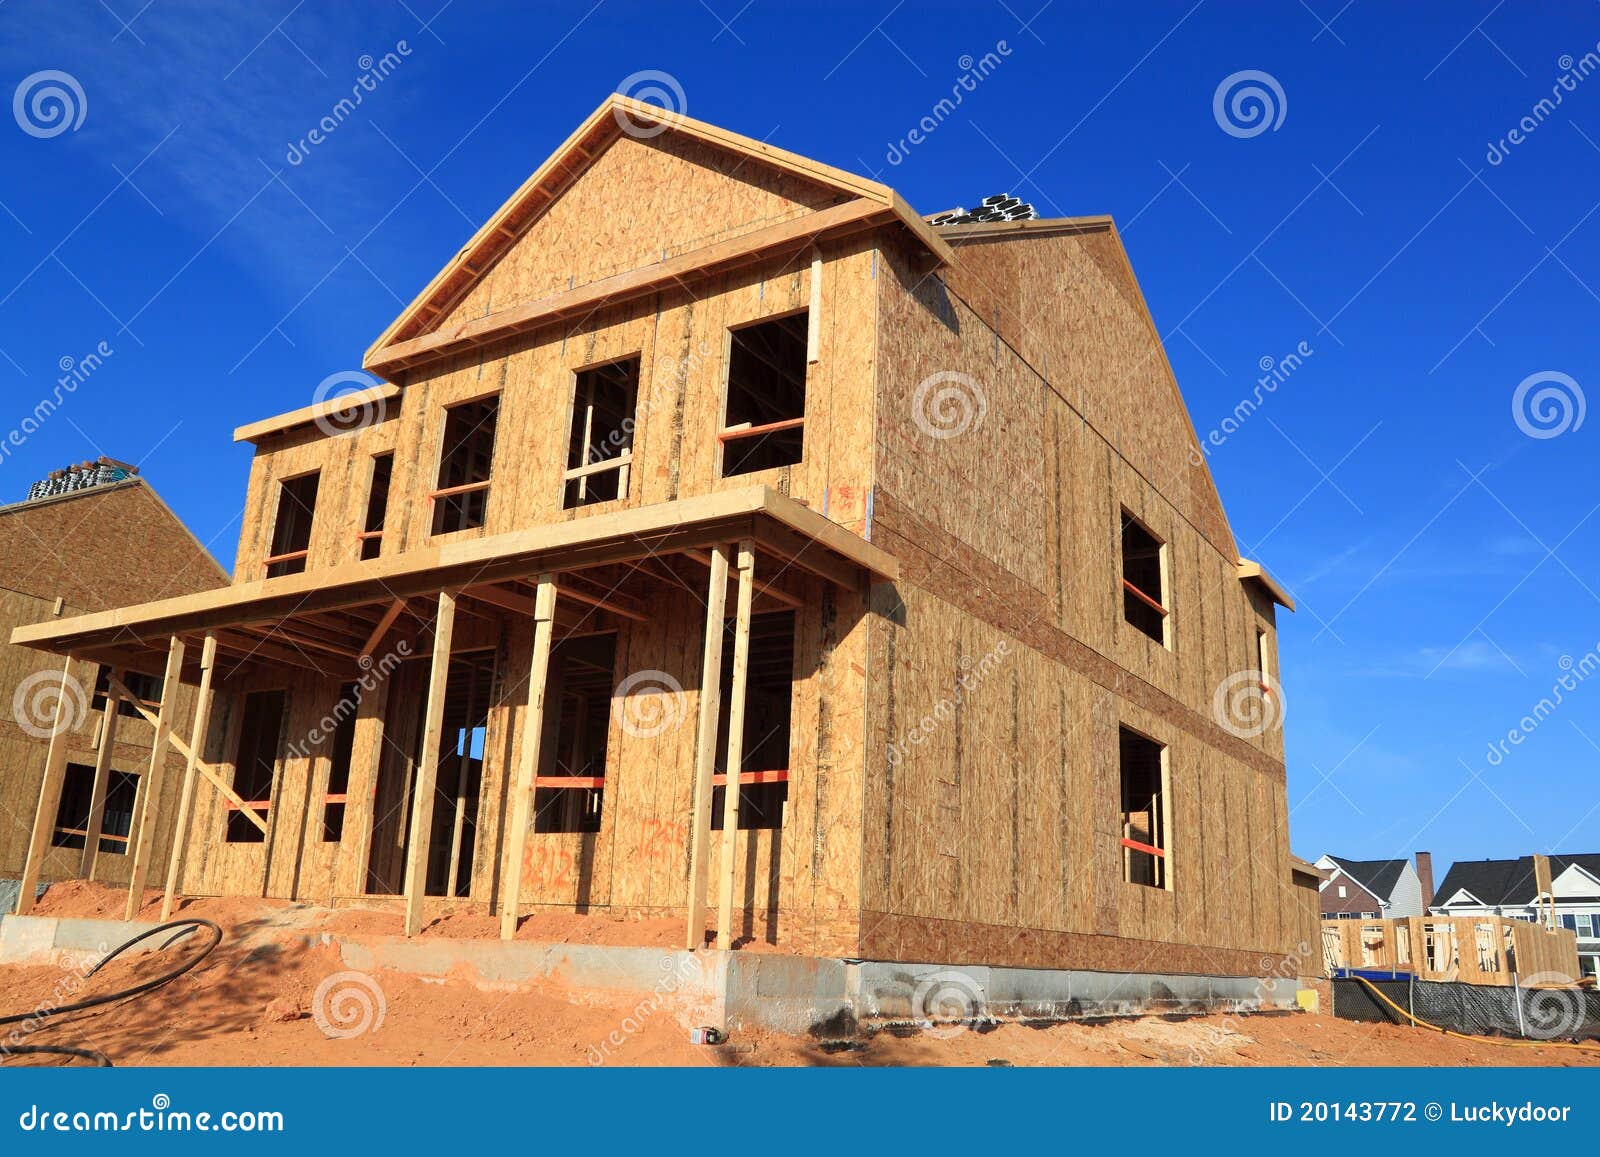 new house construction